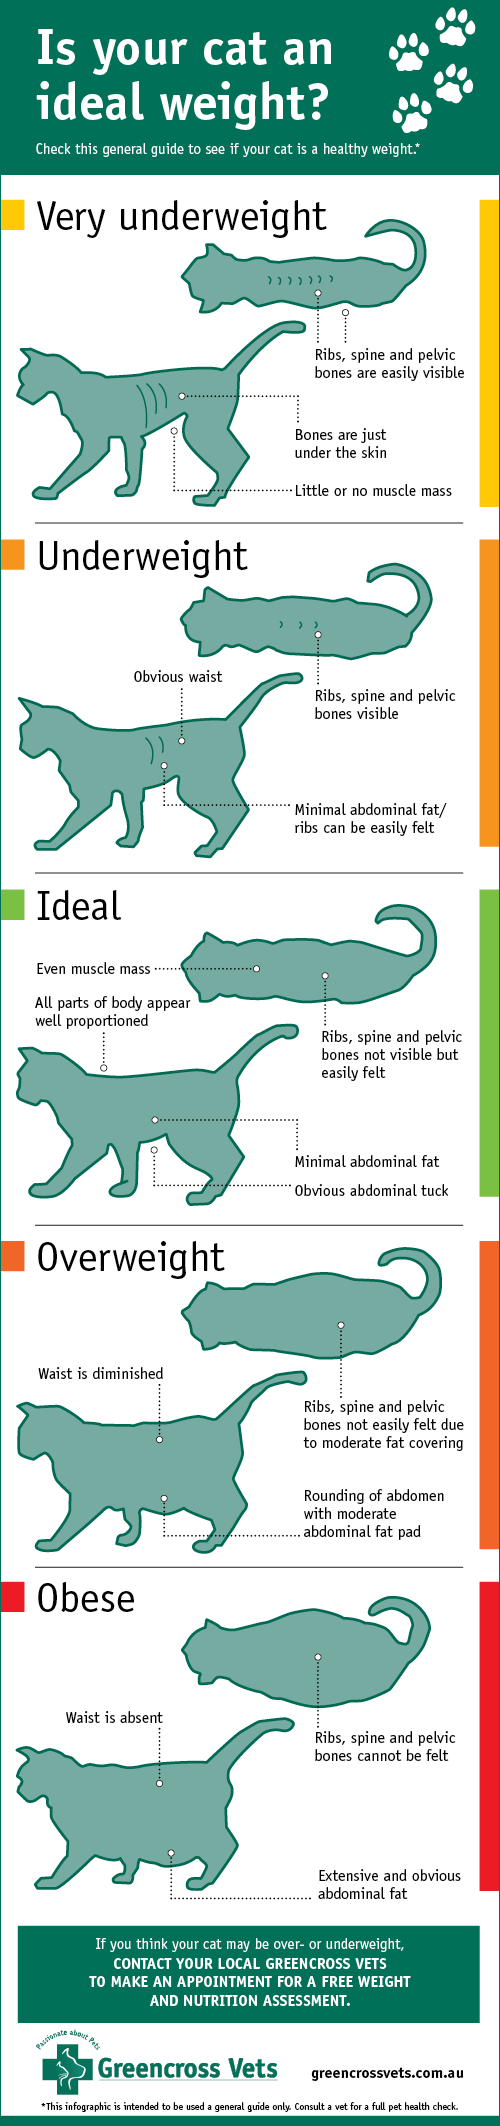 Is your cat an ideal weight?